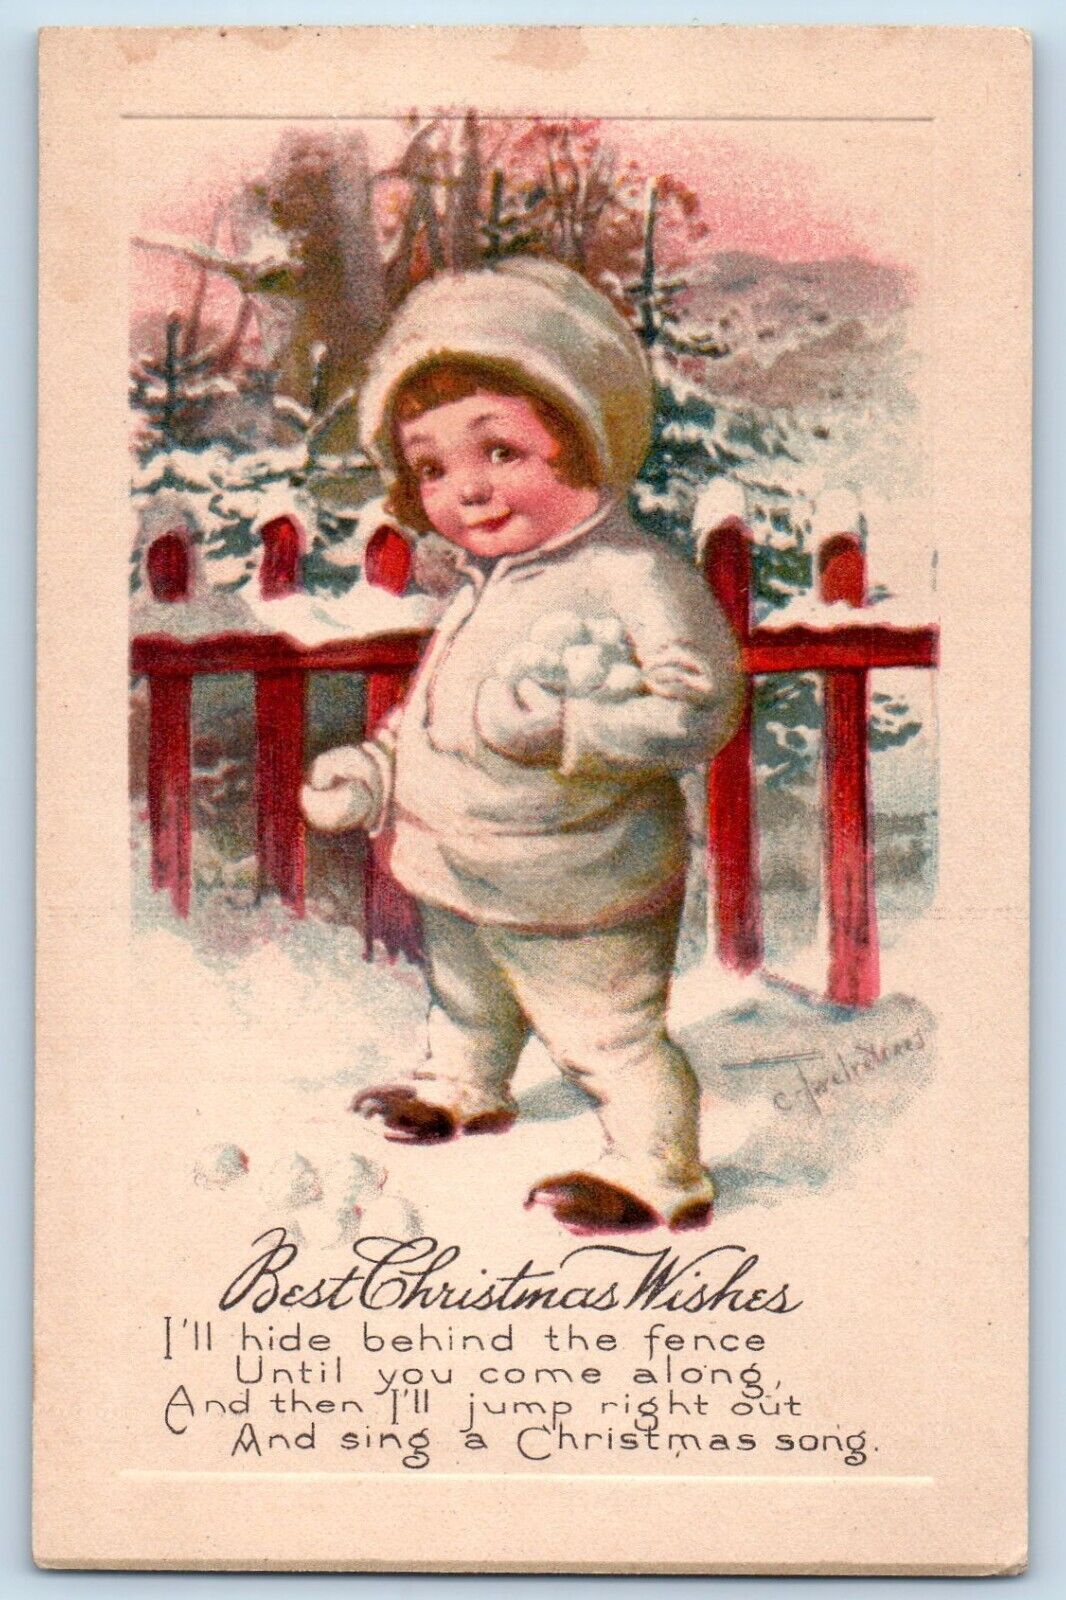 Twelvetrees Signed Artist Postcard Christmas Wishes Child Playing Snowball 1926